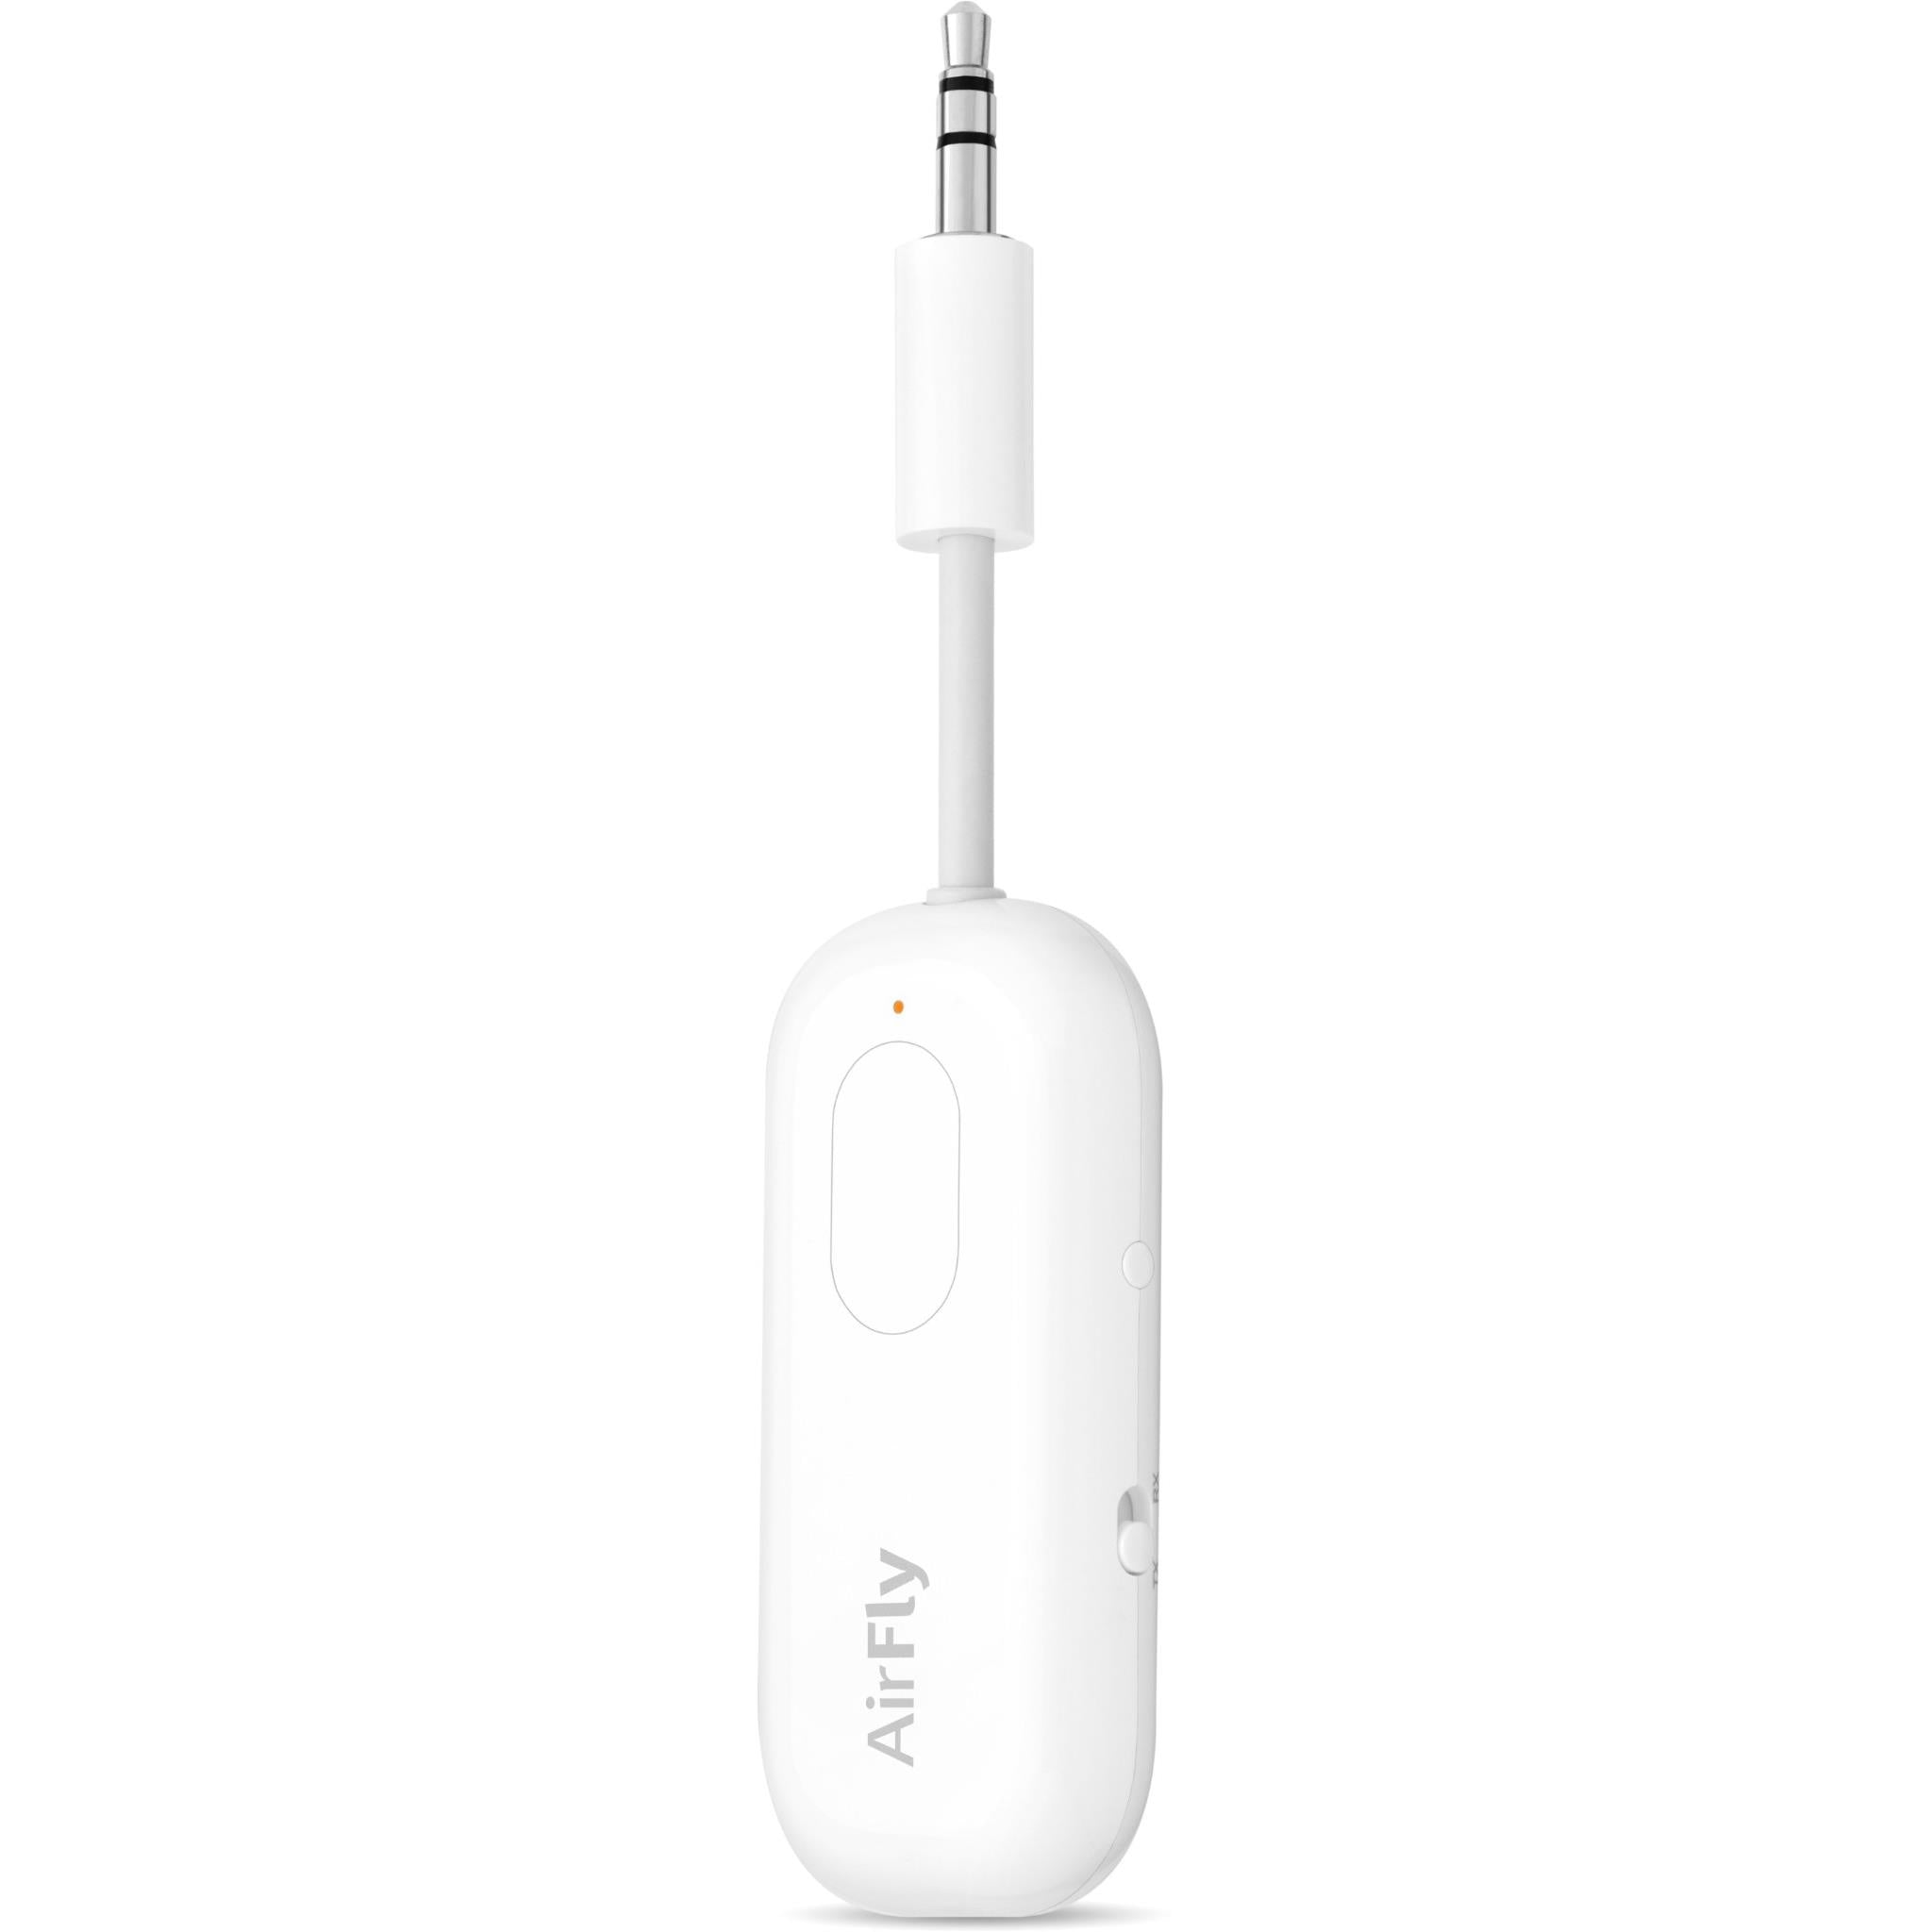 twelve south airfly pro bluetooth audio transmitter (white)